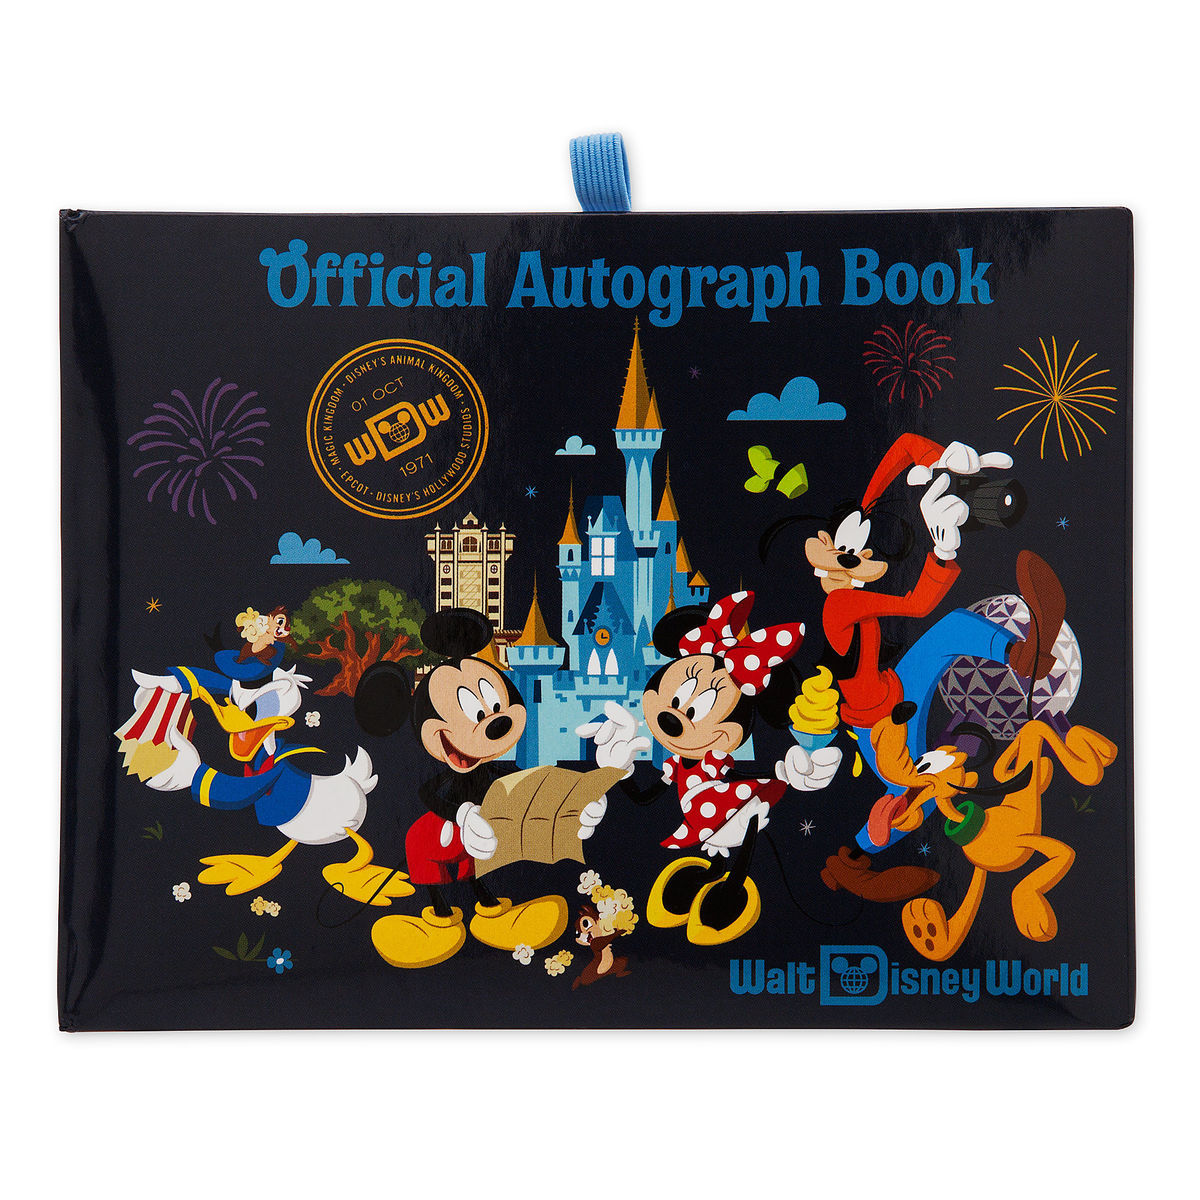 The Best Autograph Books to Bring to Disney World